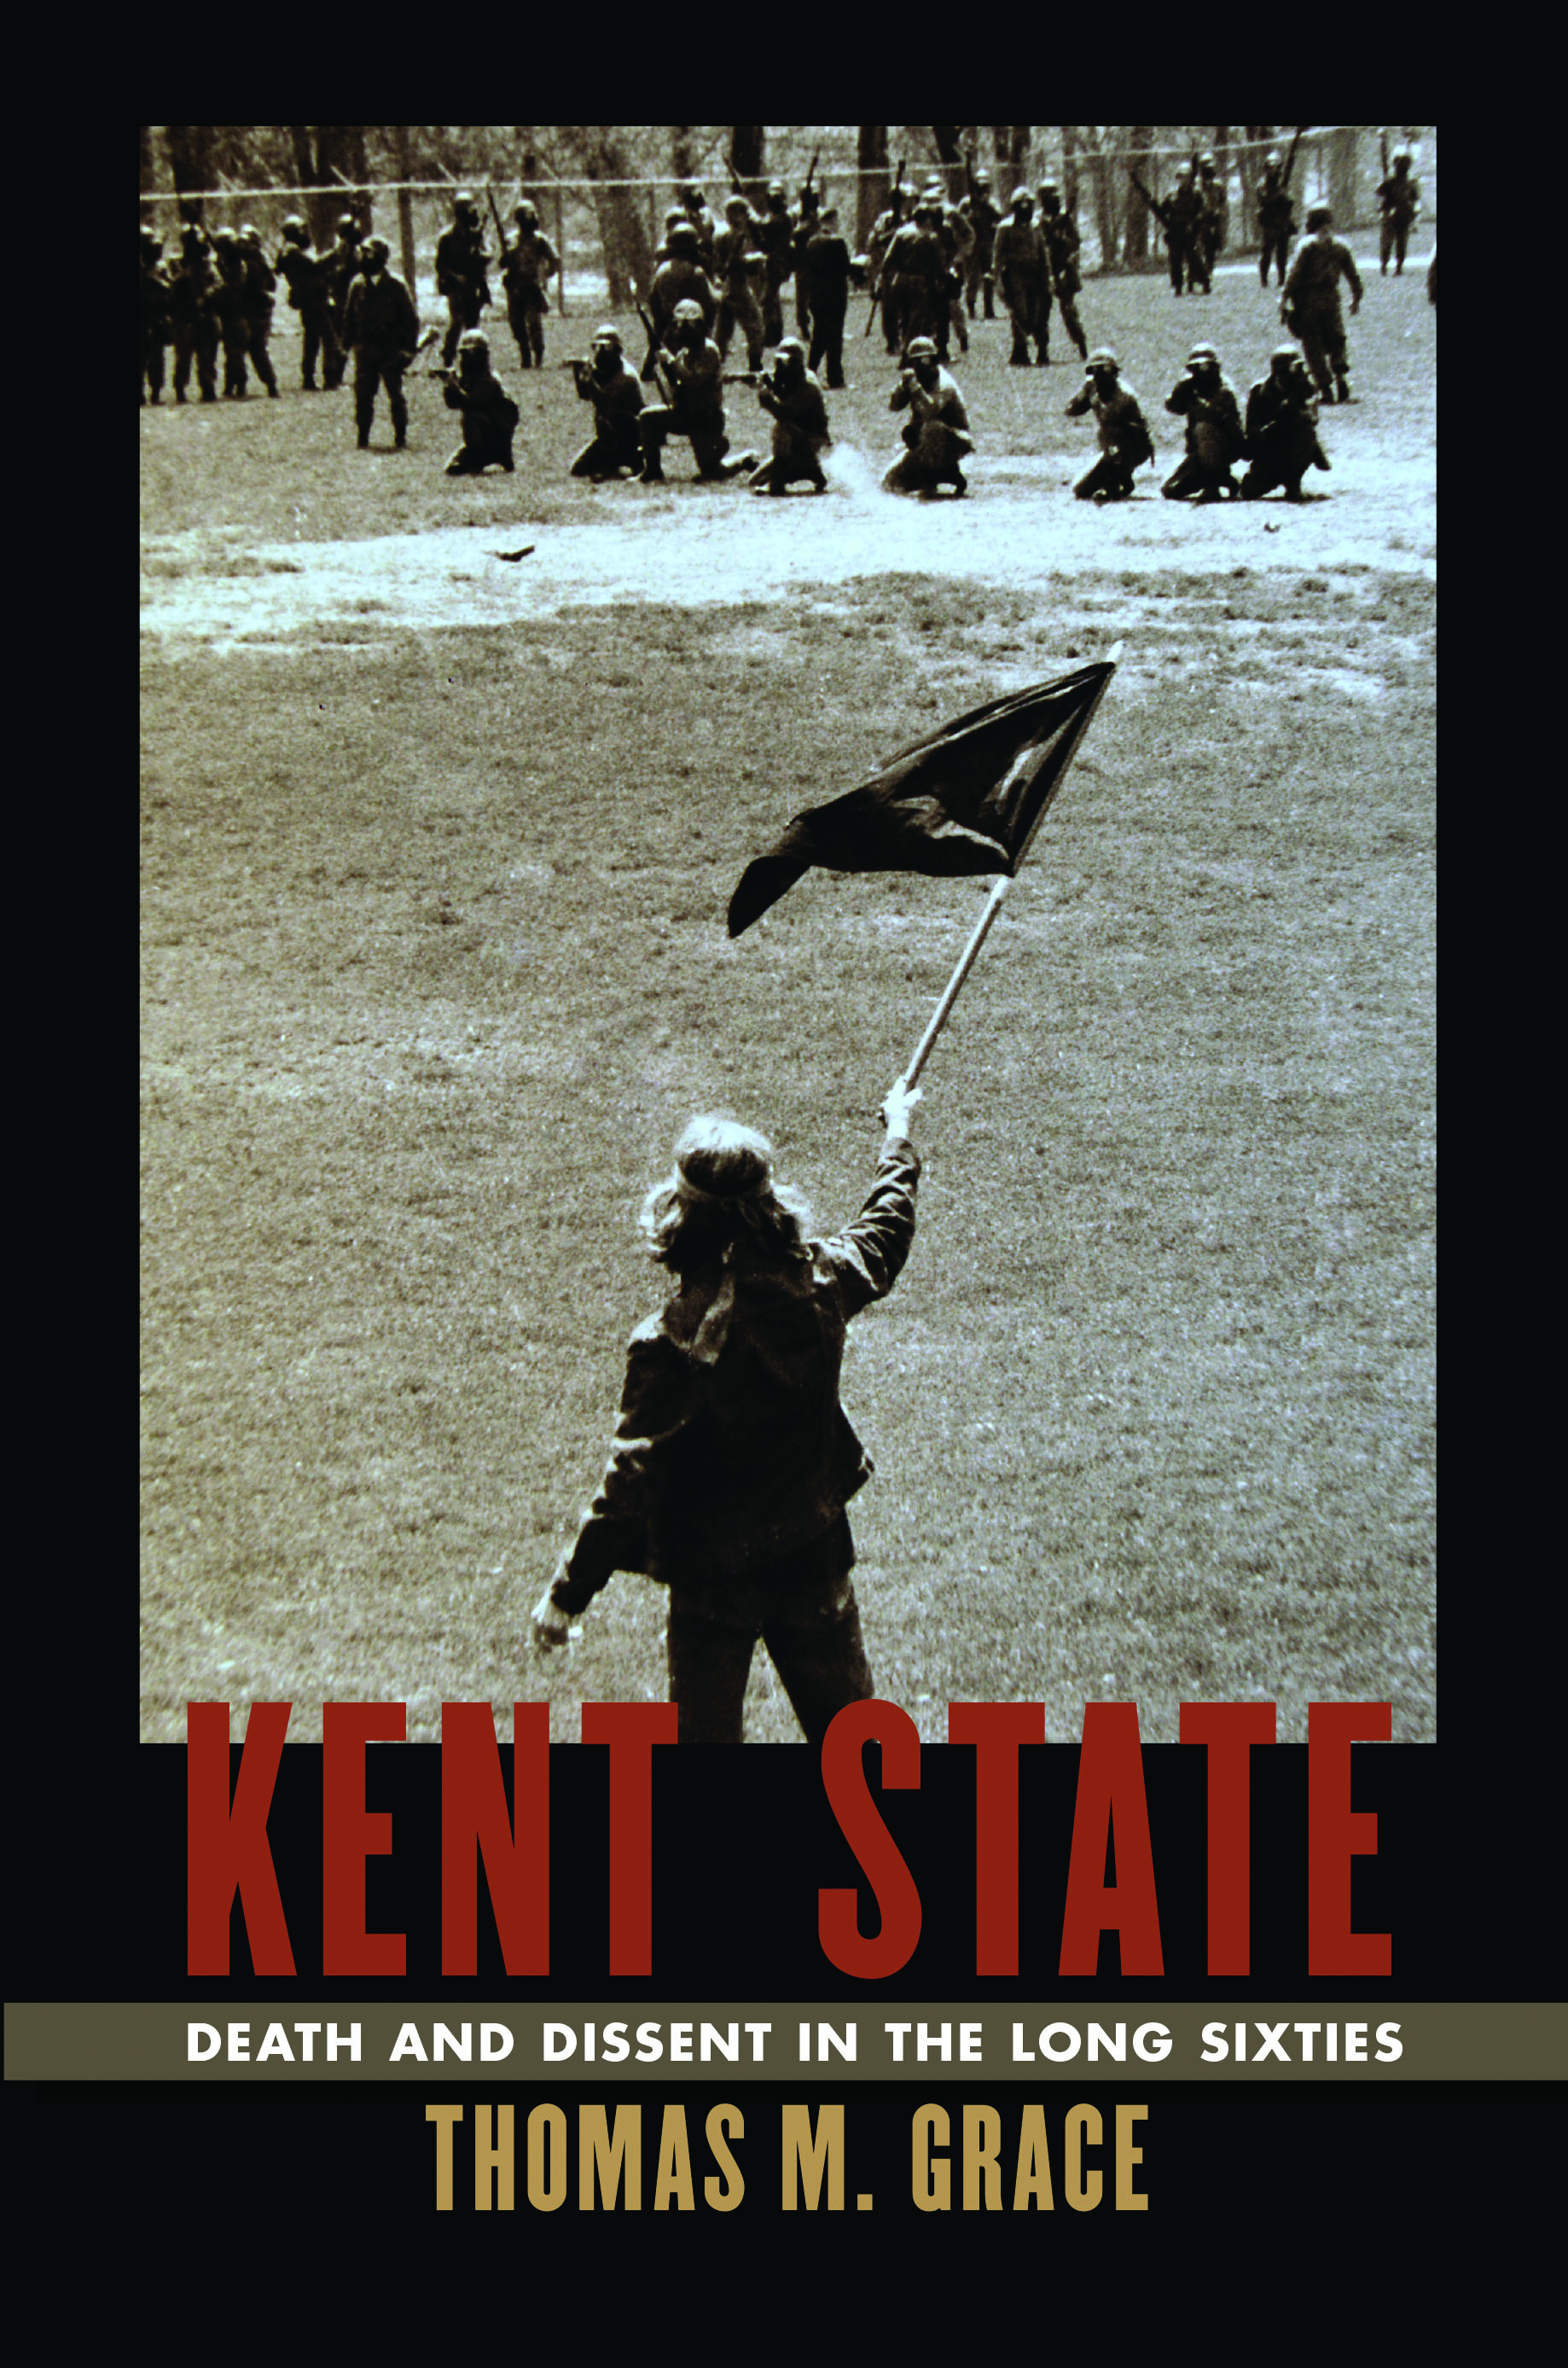 Kent State: Death and Dissent in the Sixties